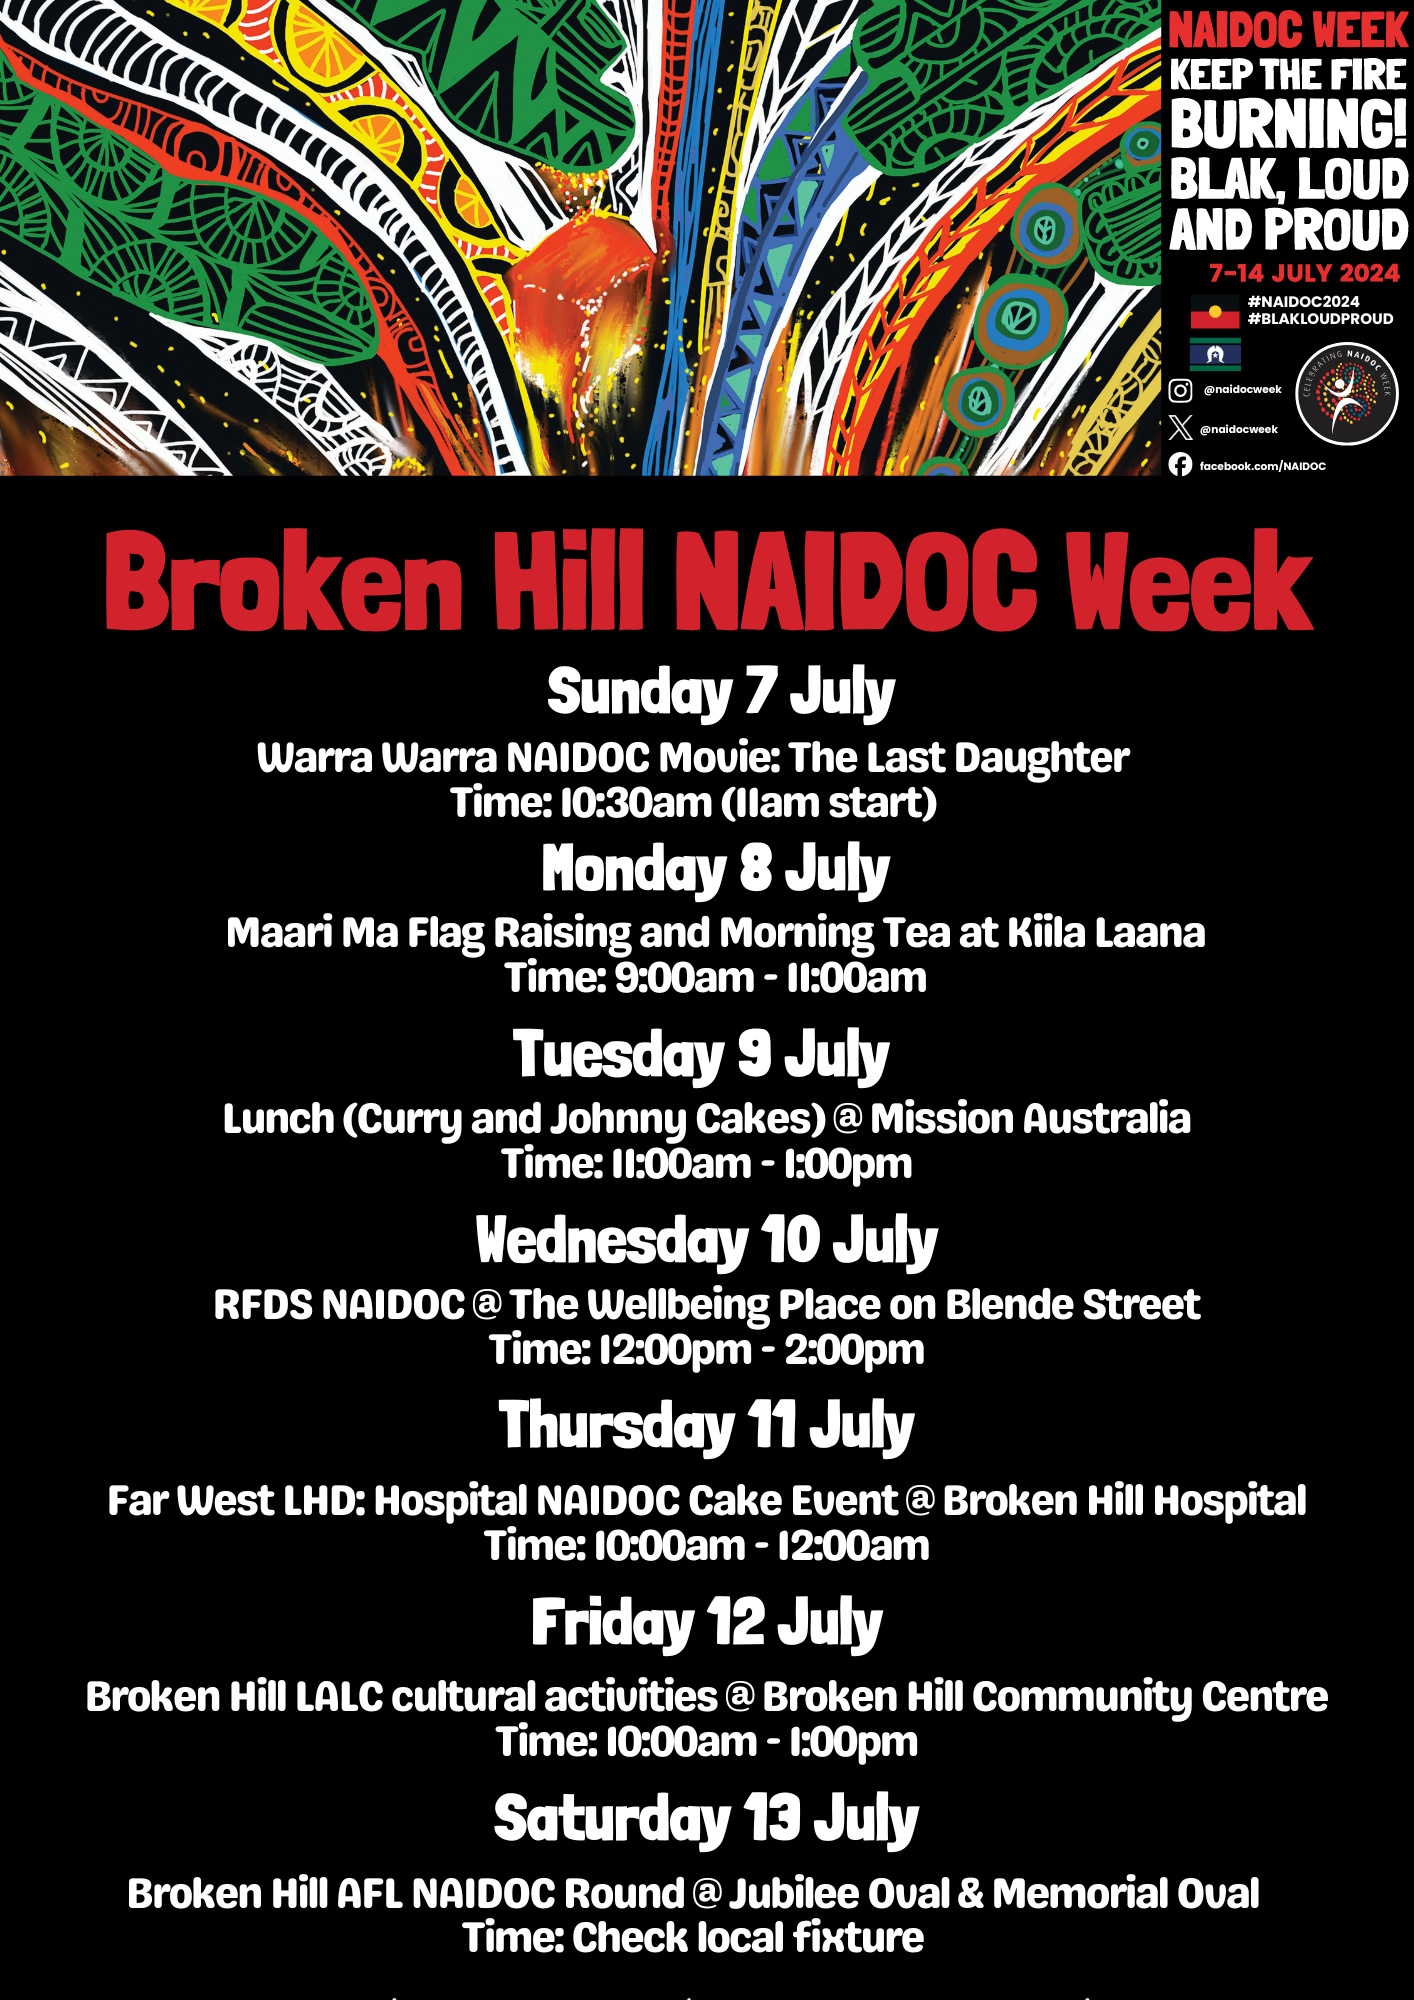 Calendar of events listed for 2024 NAIDOC Week